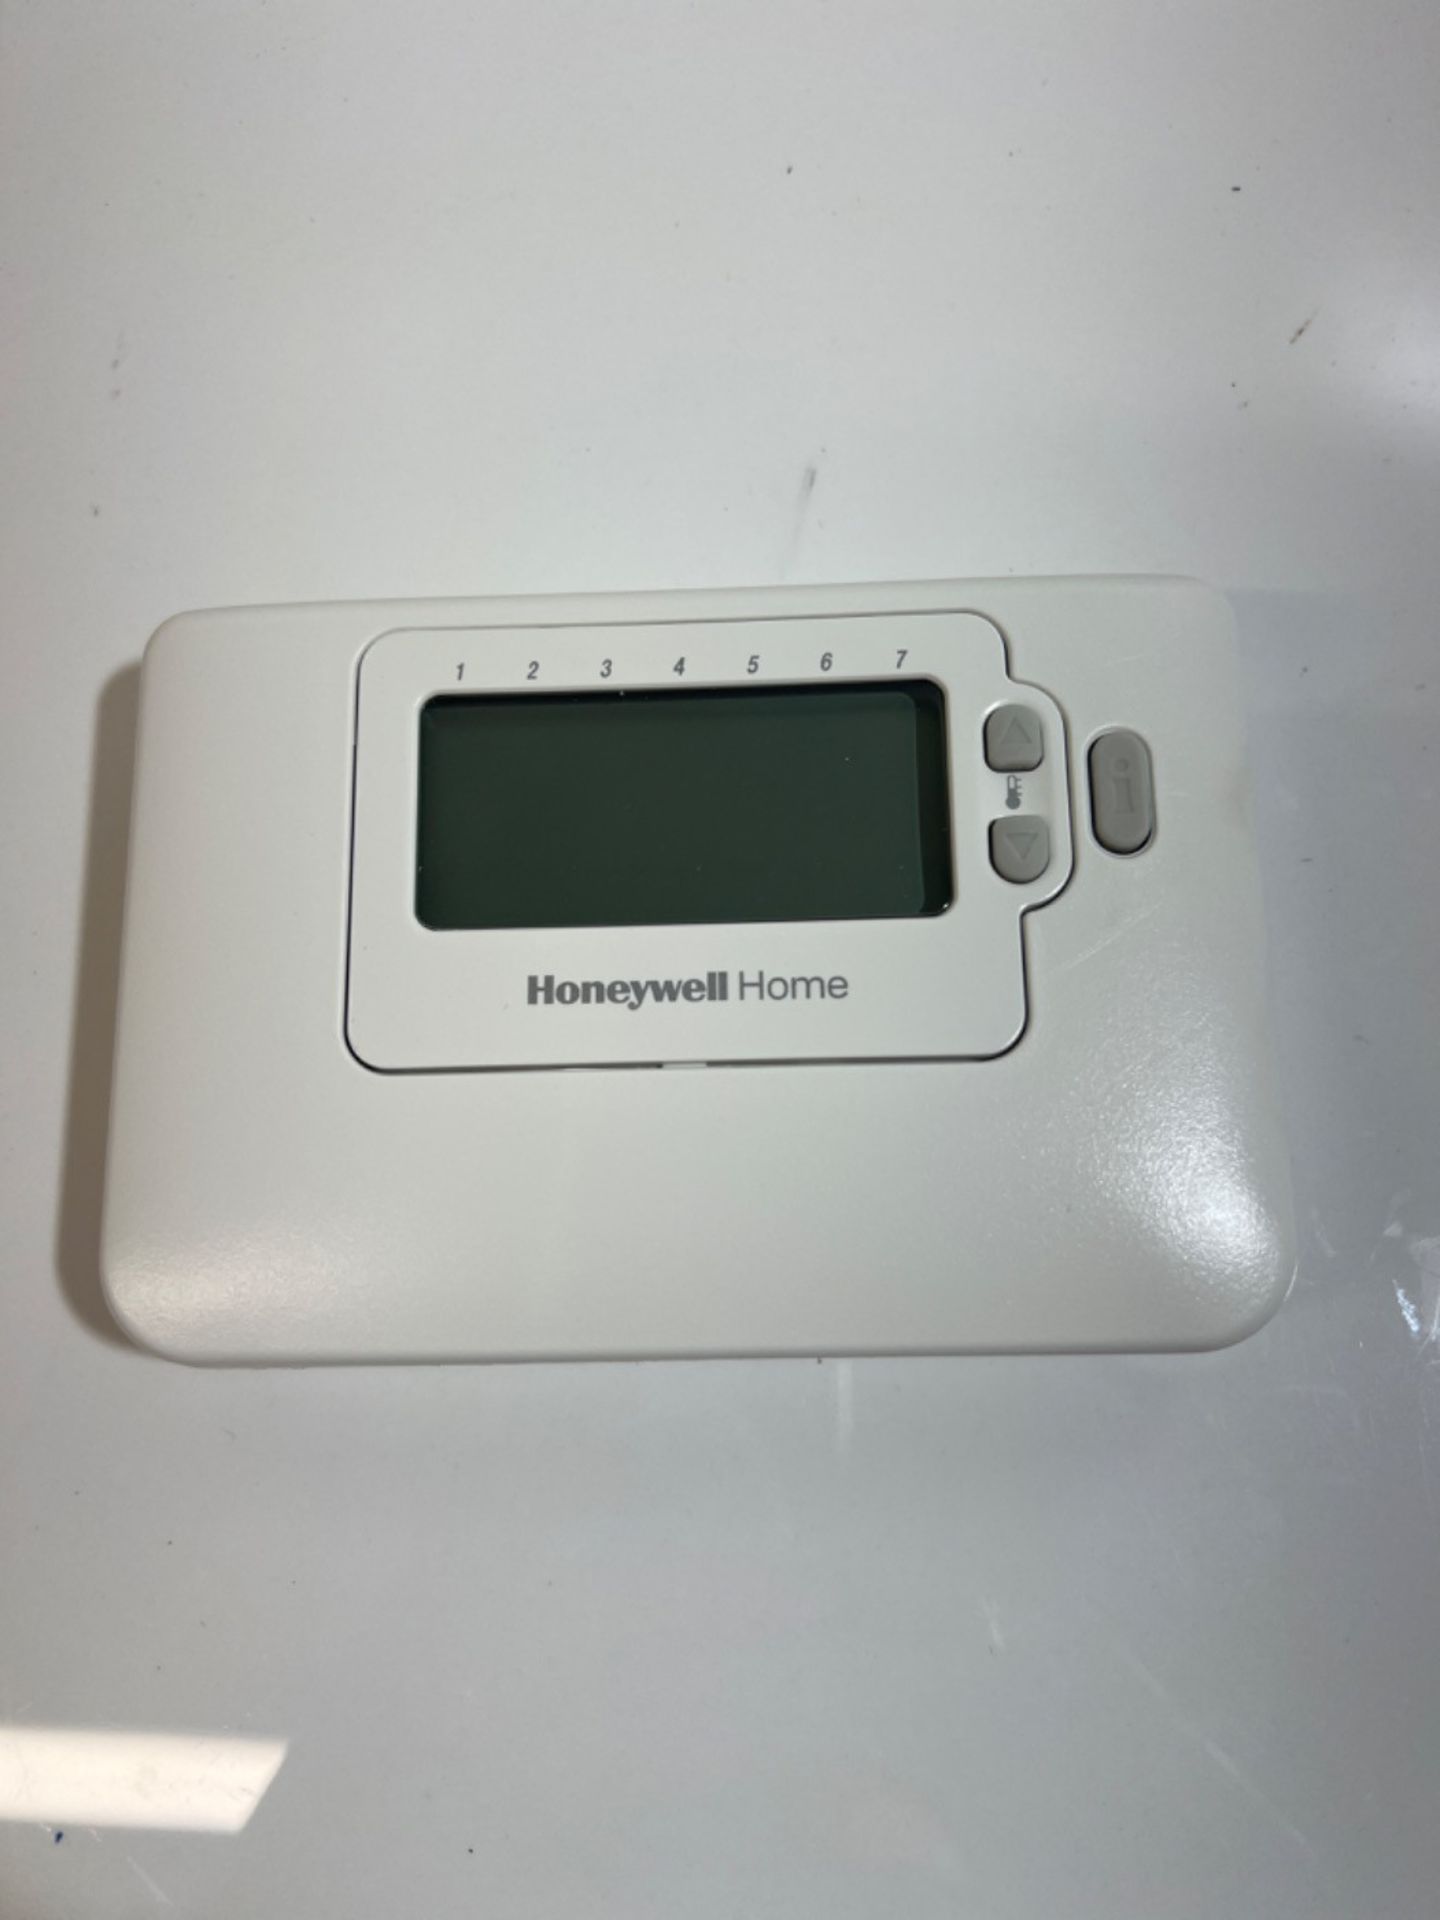 Honeywell 7 Day Programmable Thermostat CM707 - Image 3 of 3